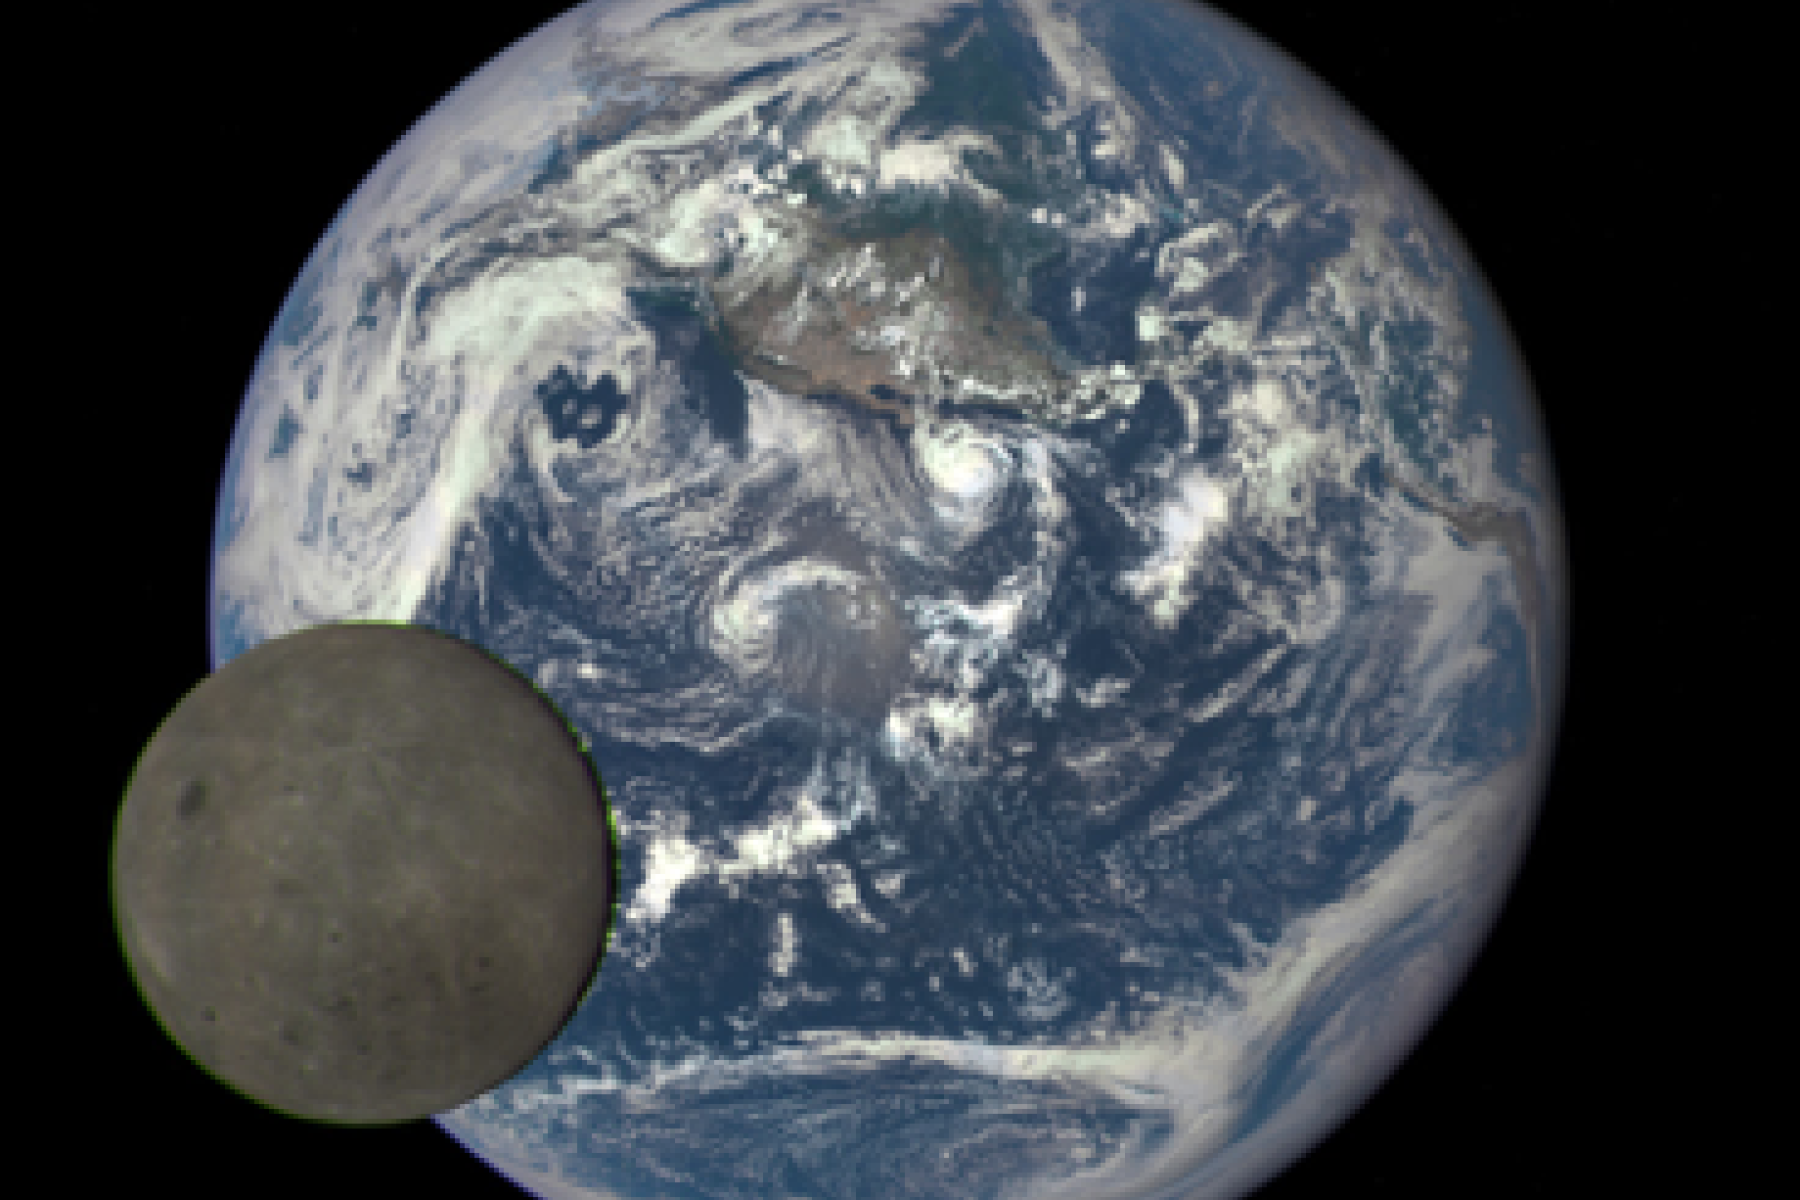 Artist depiction of the Moon revolving around the Earth